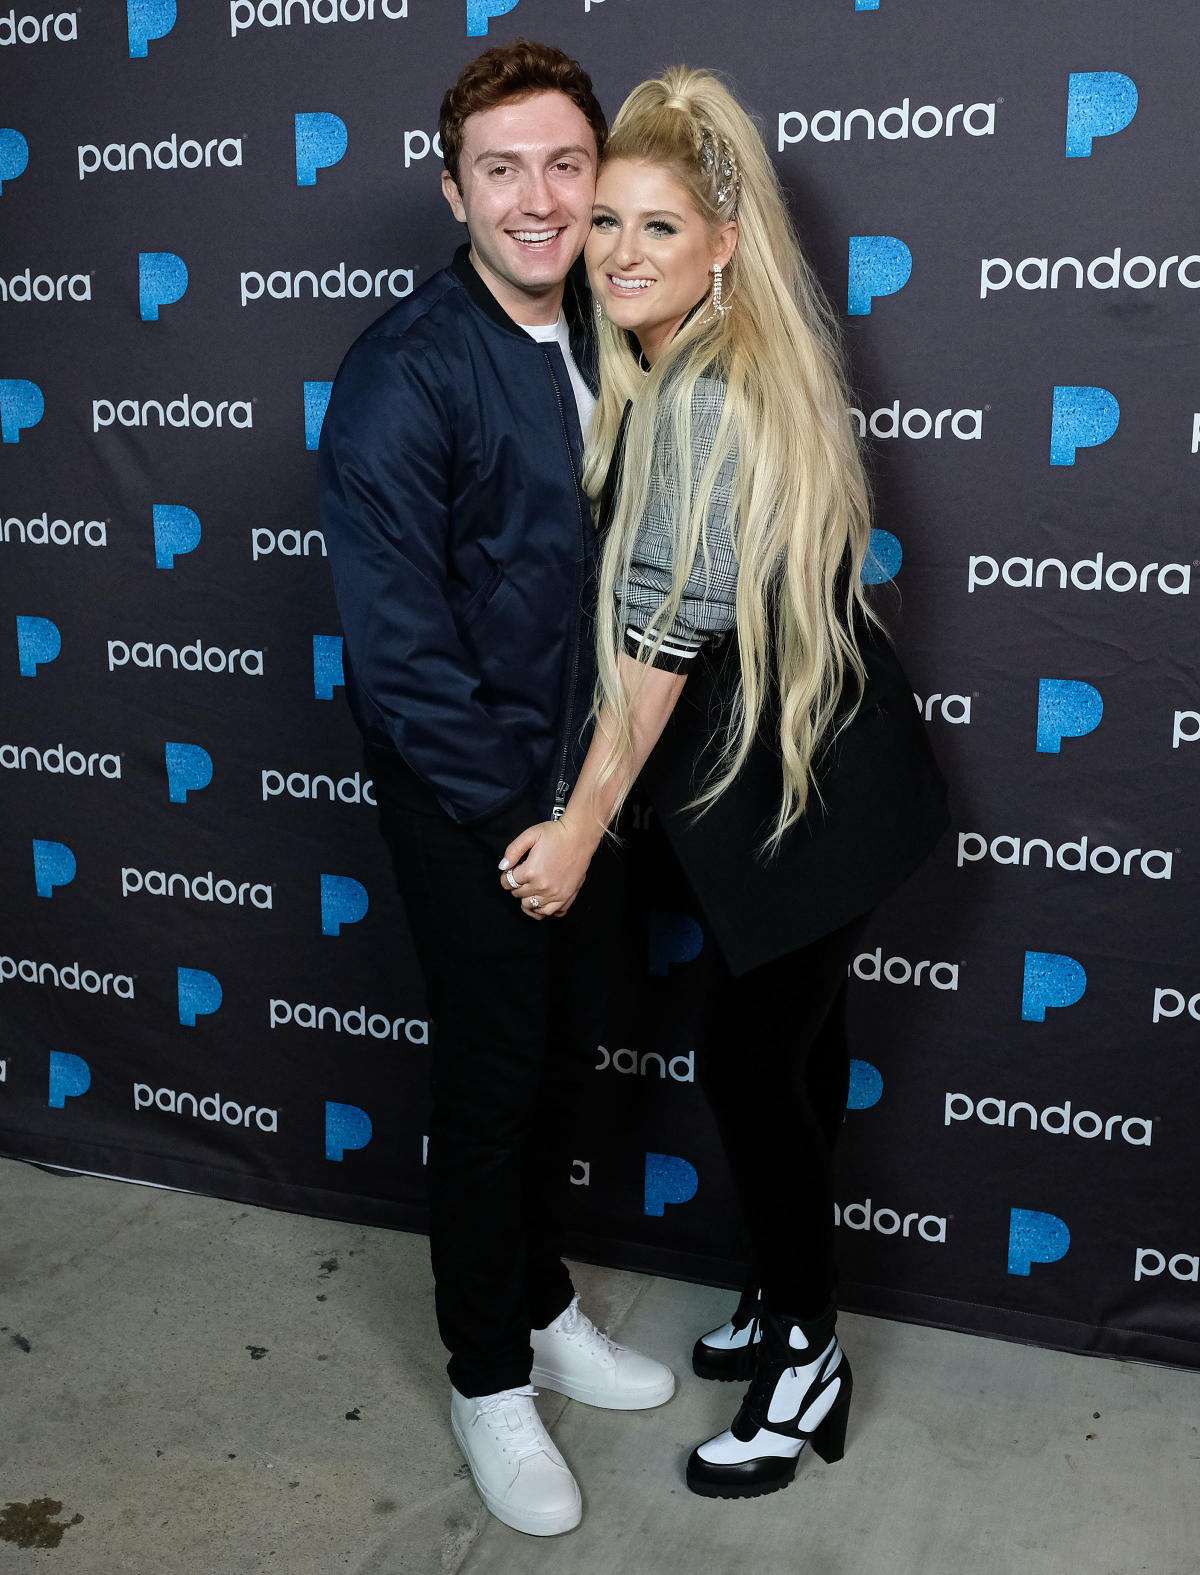 Meghan Trainor on Painful Sex & Wishing Her Husband Was 'Smaller